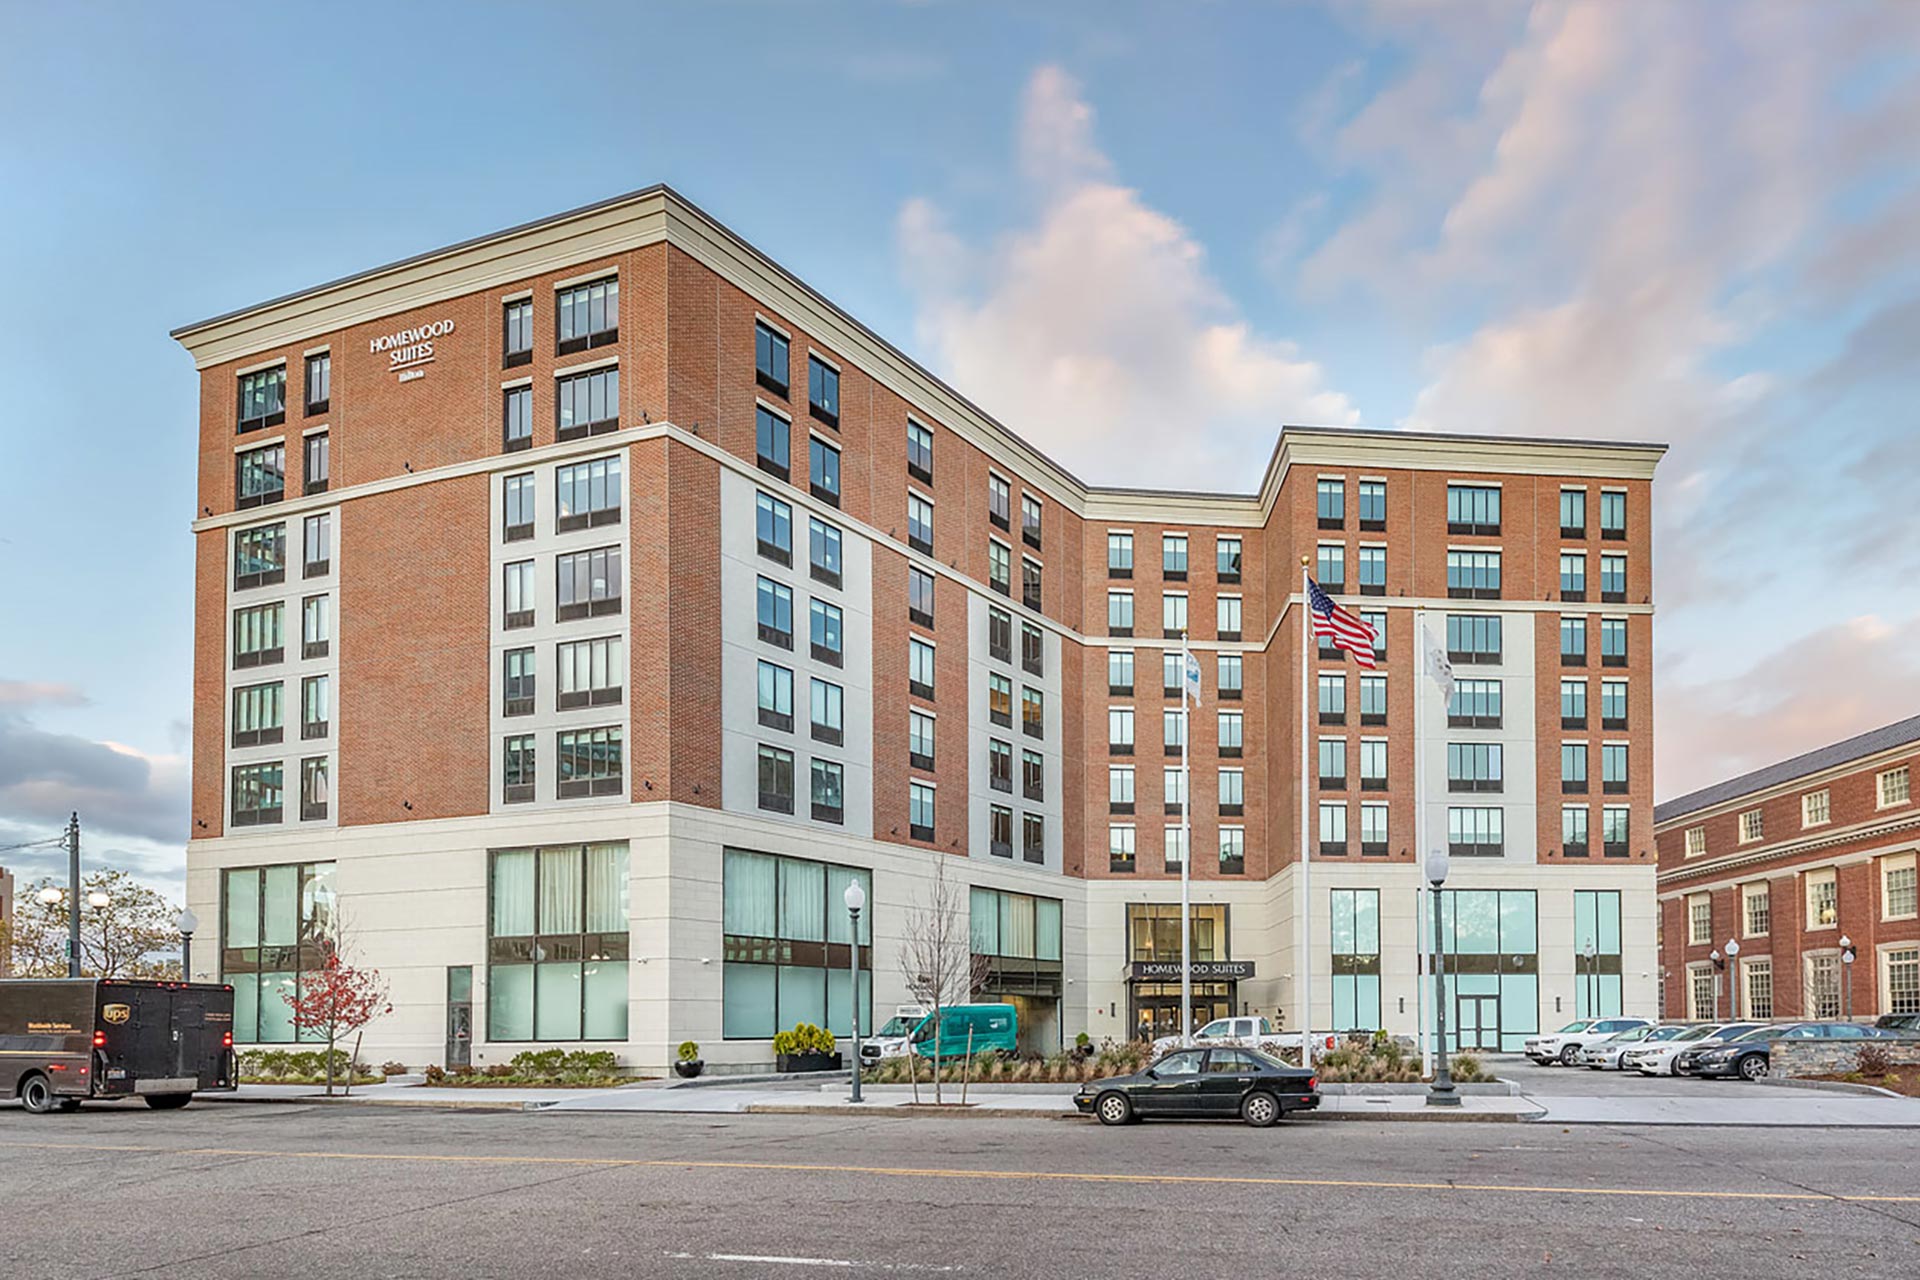 Homewood Suites Providence - ZDS Architecture & Interiors